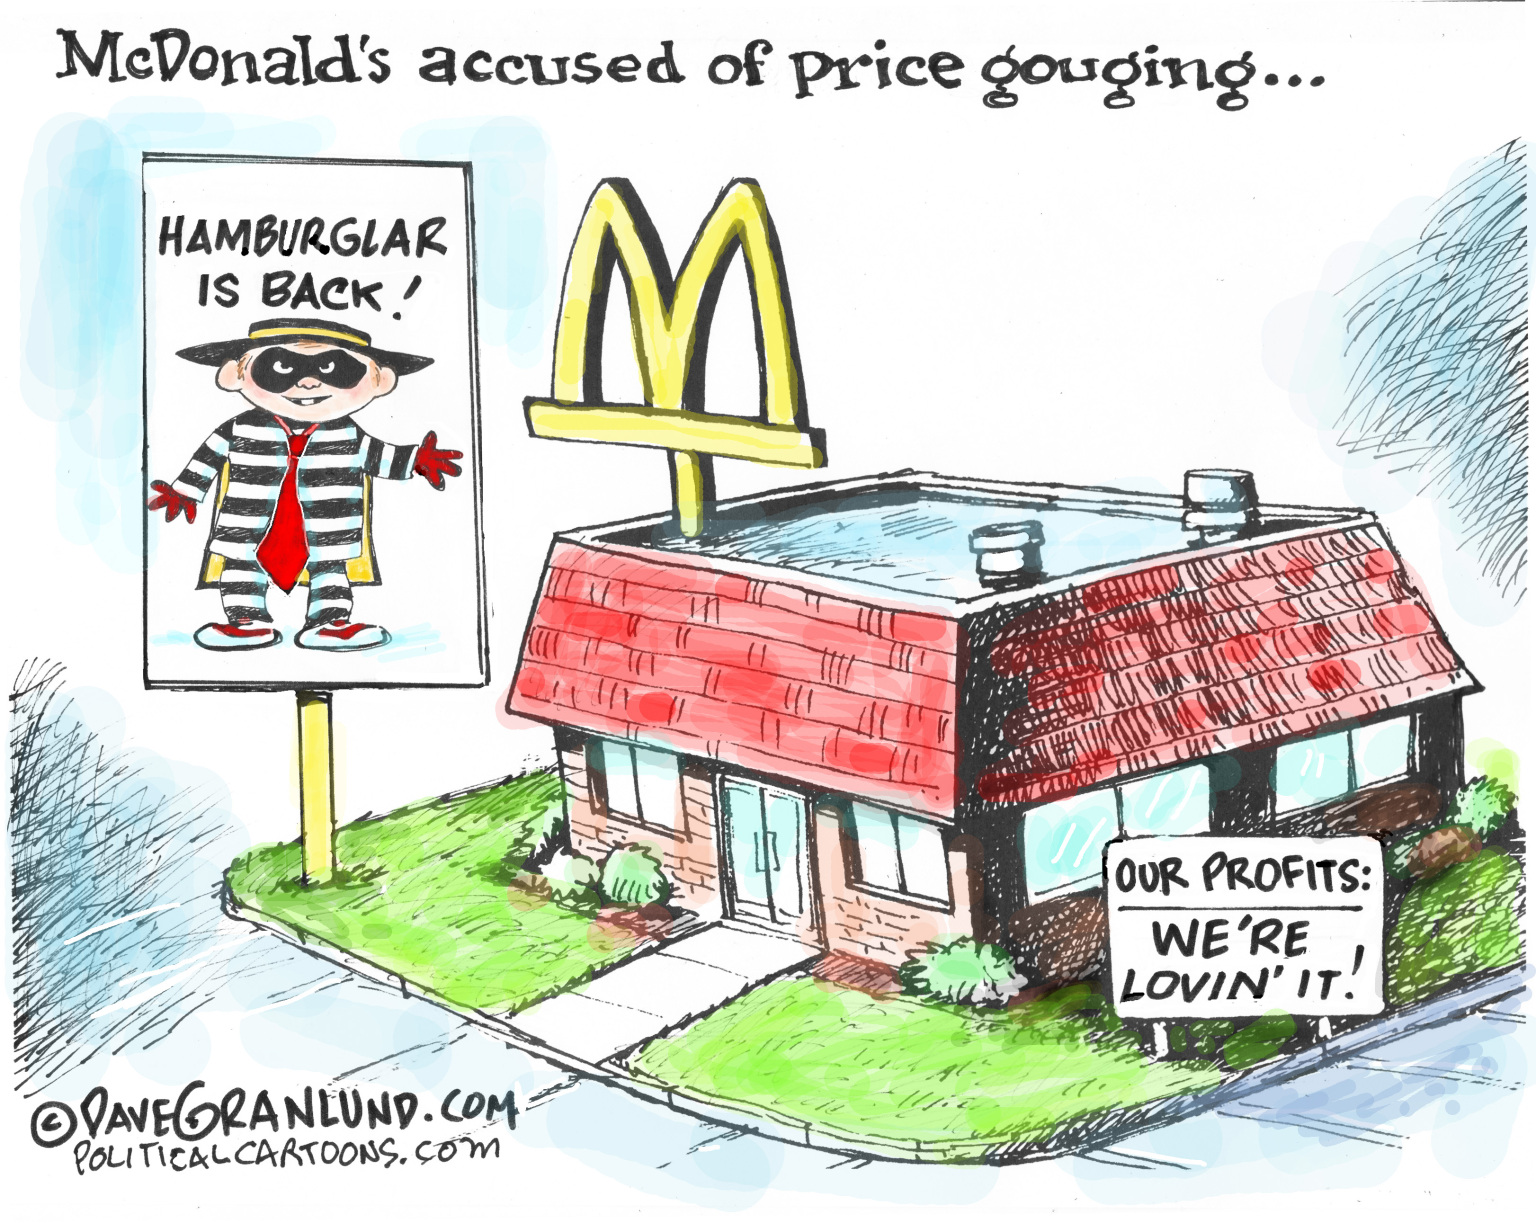 McDonald's Price Gouging - By Dave Granlund